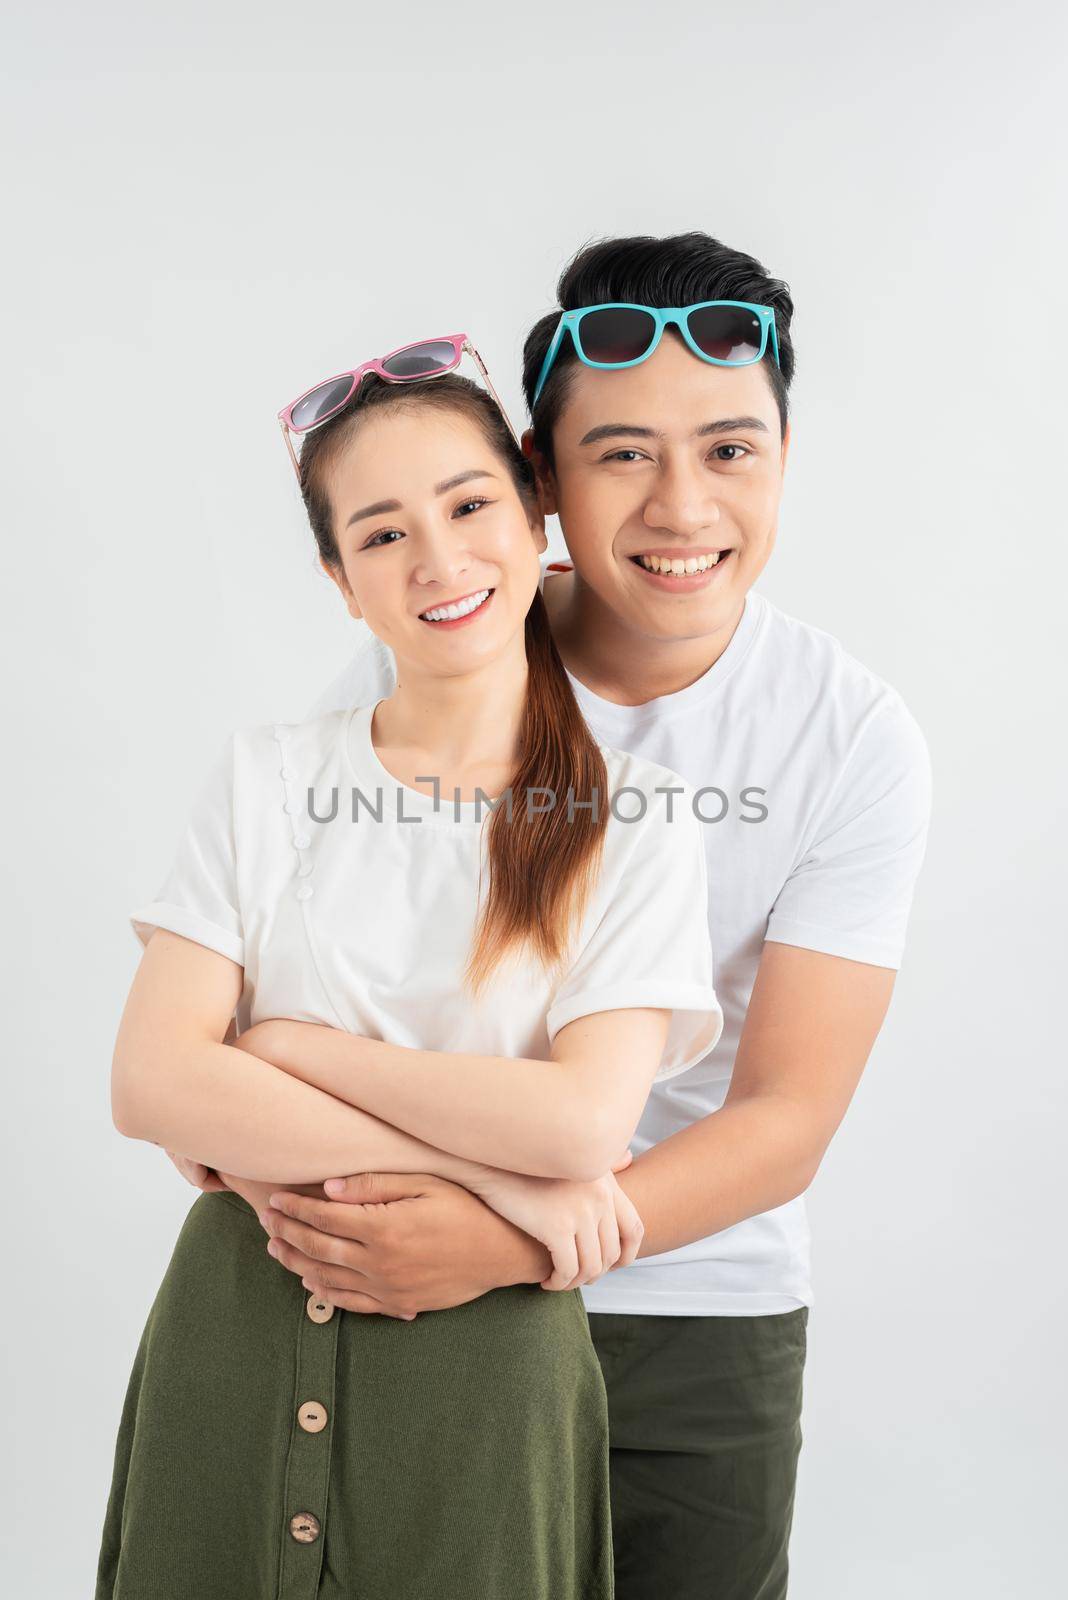 happy couple embracing, isolated on white background, man in glasses, Positive emotion facial expression